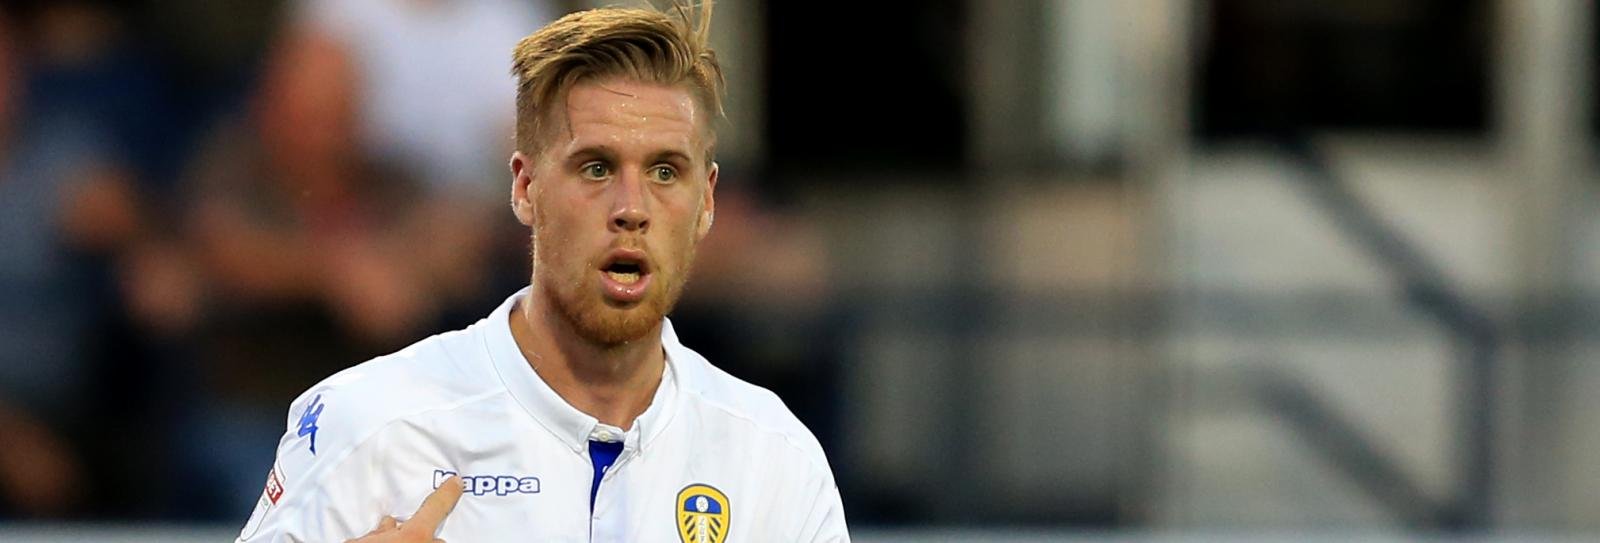 Leeds United’s Pontus Jansson would clear a missile with his head if you asked him to